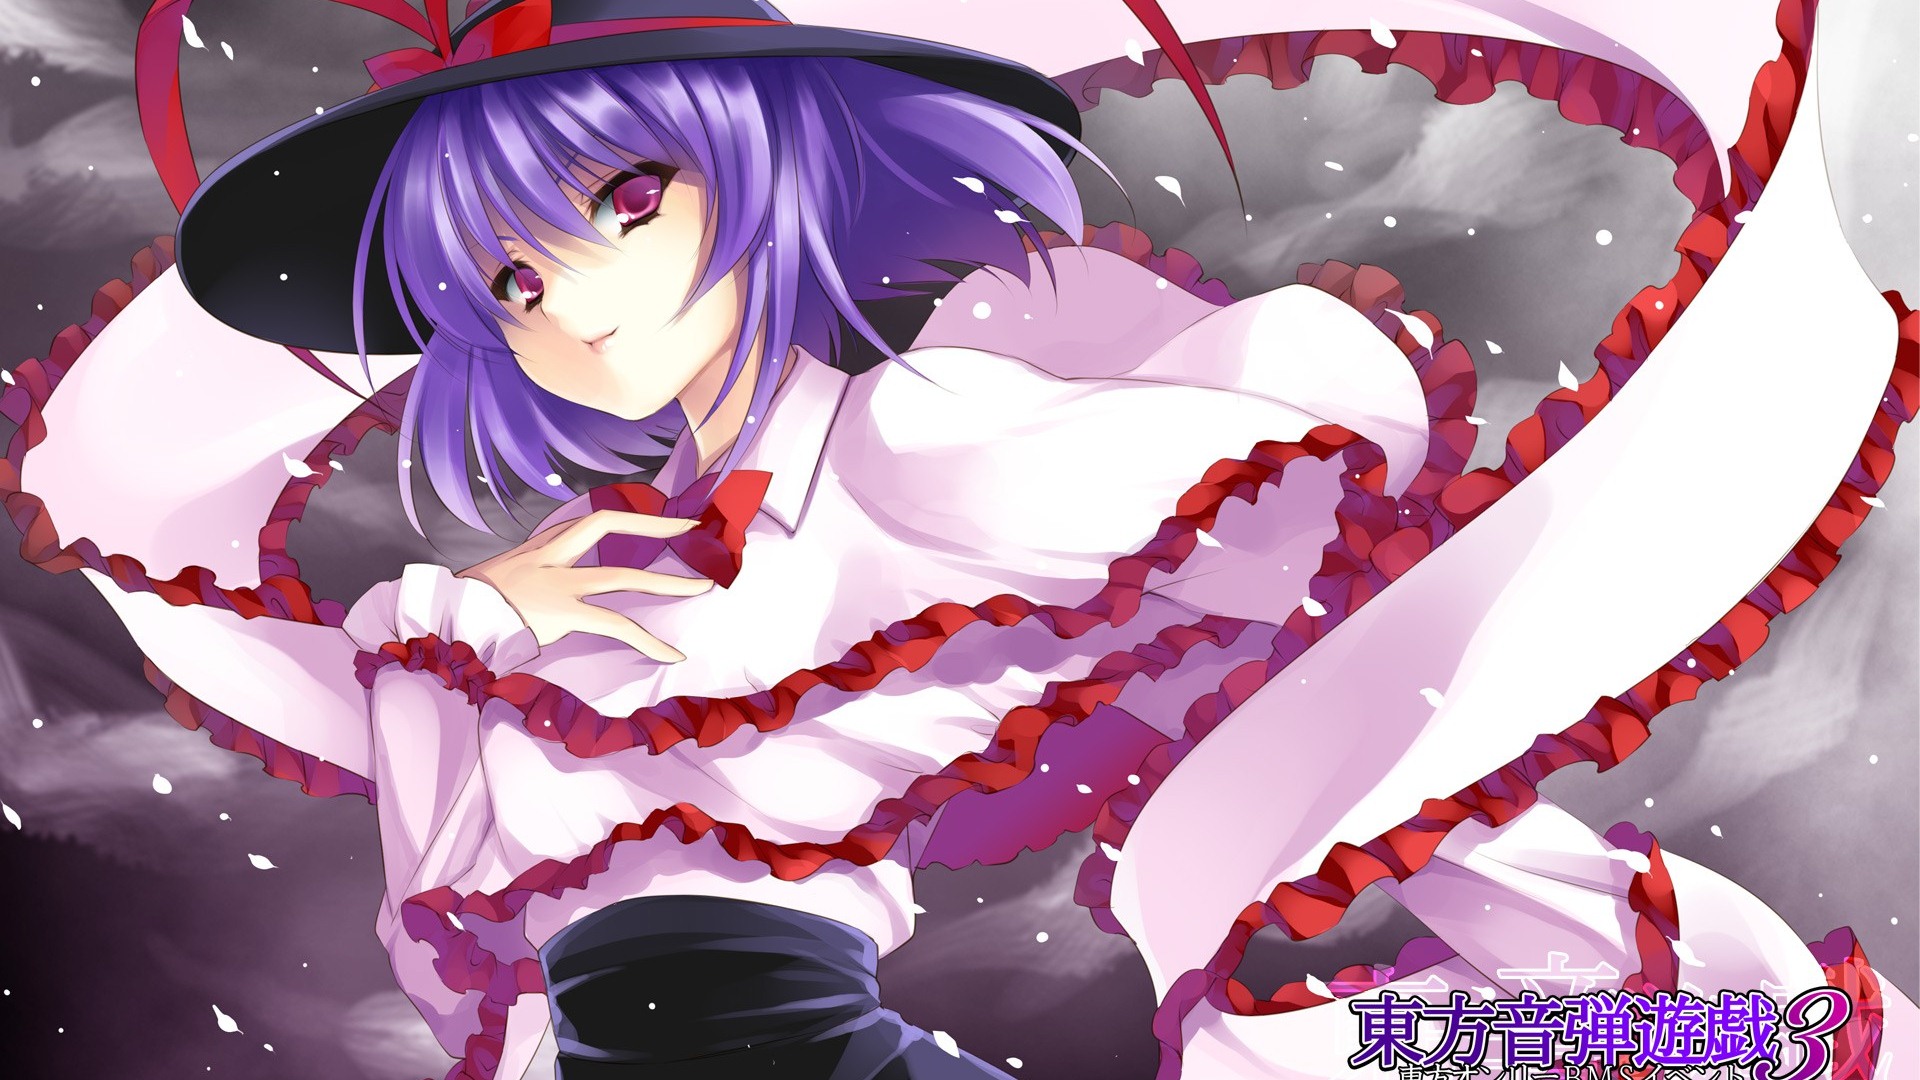 Touhou Project caricature HD wallpapers #6 - 1920x1080